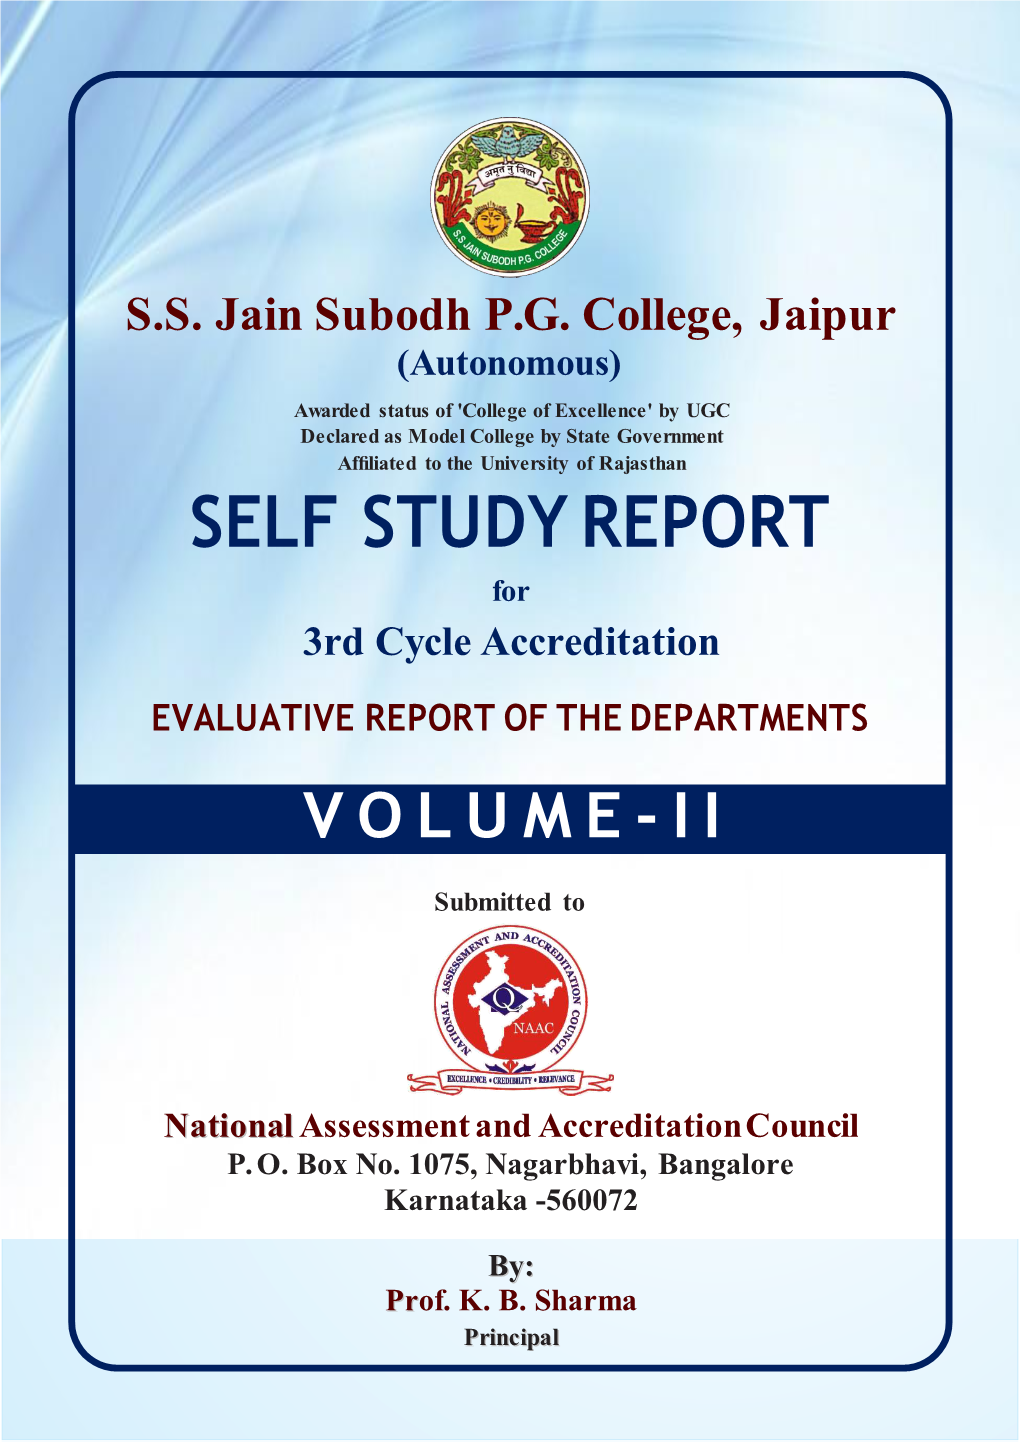 SELF STUDY REPORT for 3Rd Cycle Accreditation